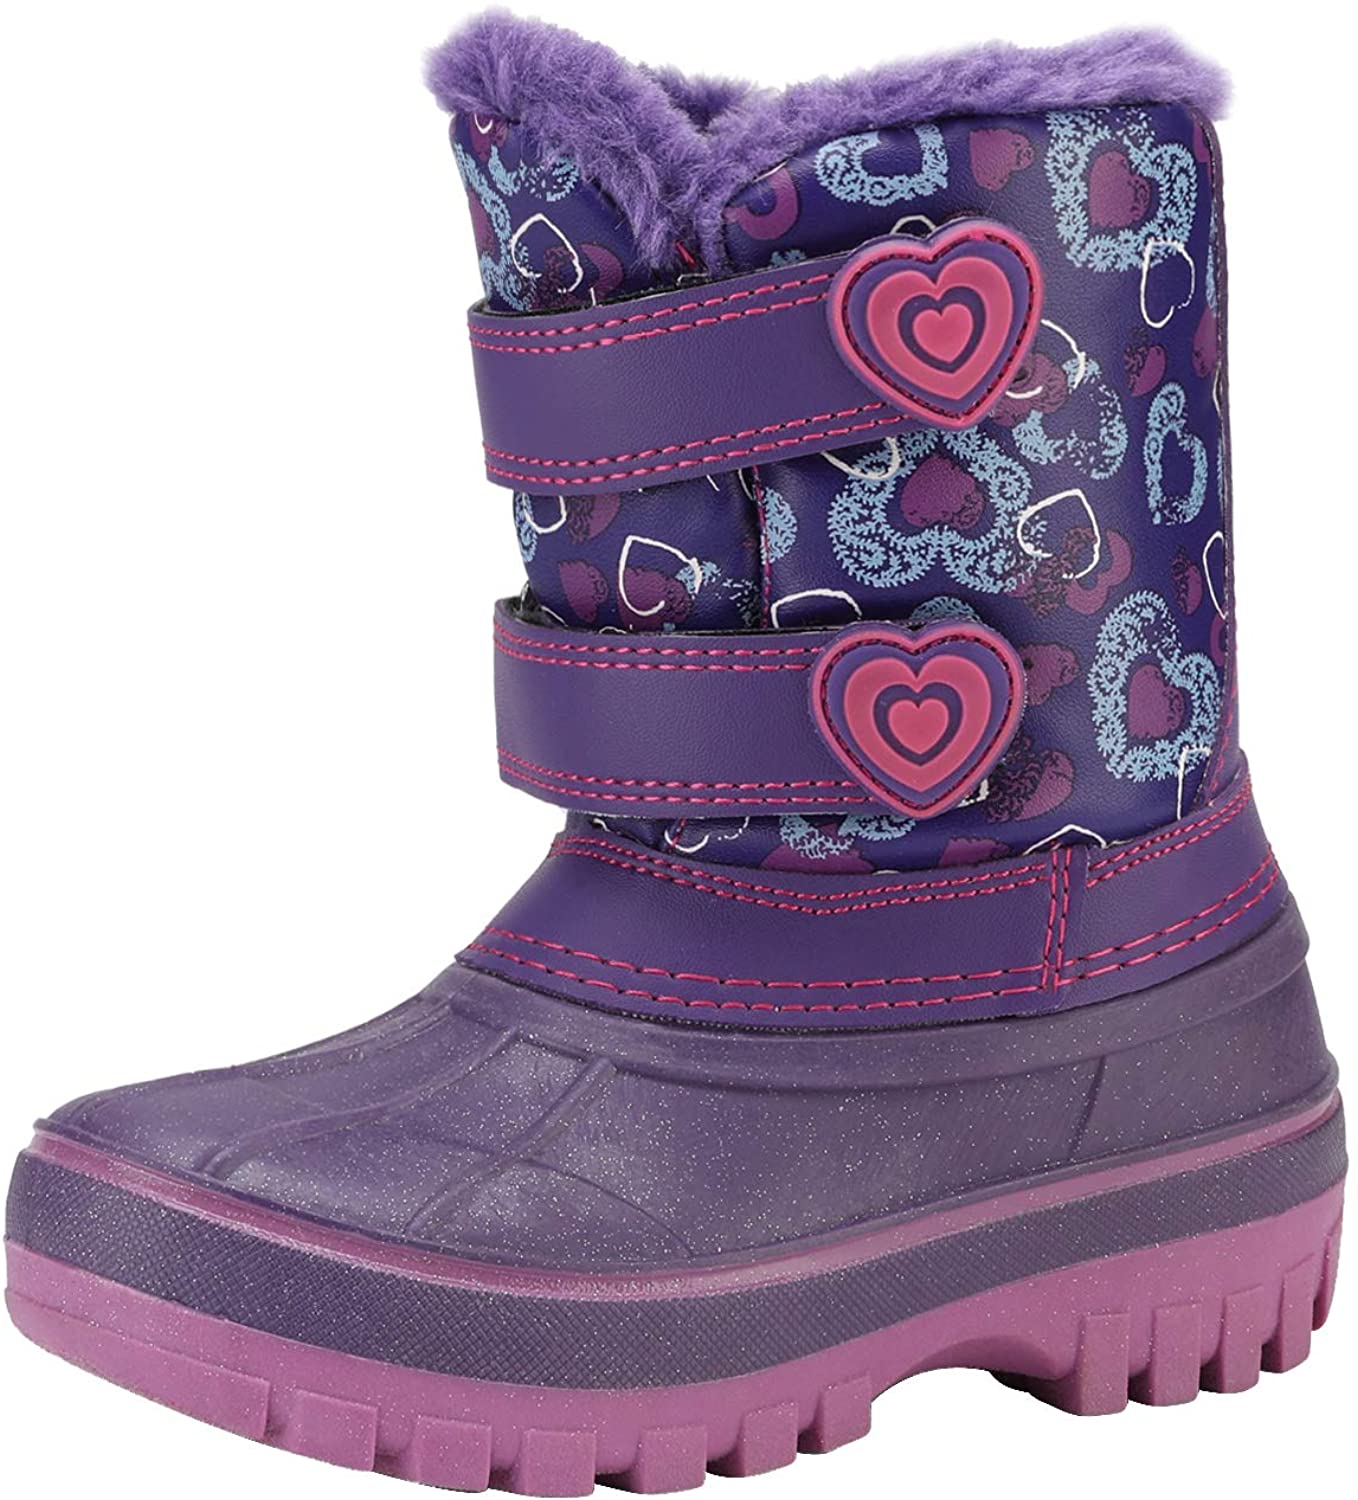 DREAM PAIRS Boys & Girls Toddler/Little Kid/Big Kid Ducko Ankle Winter Snow Boots 